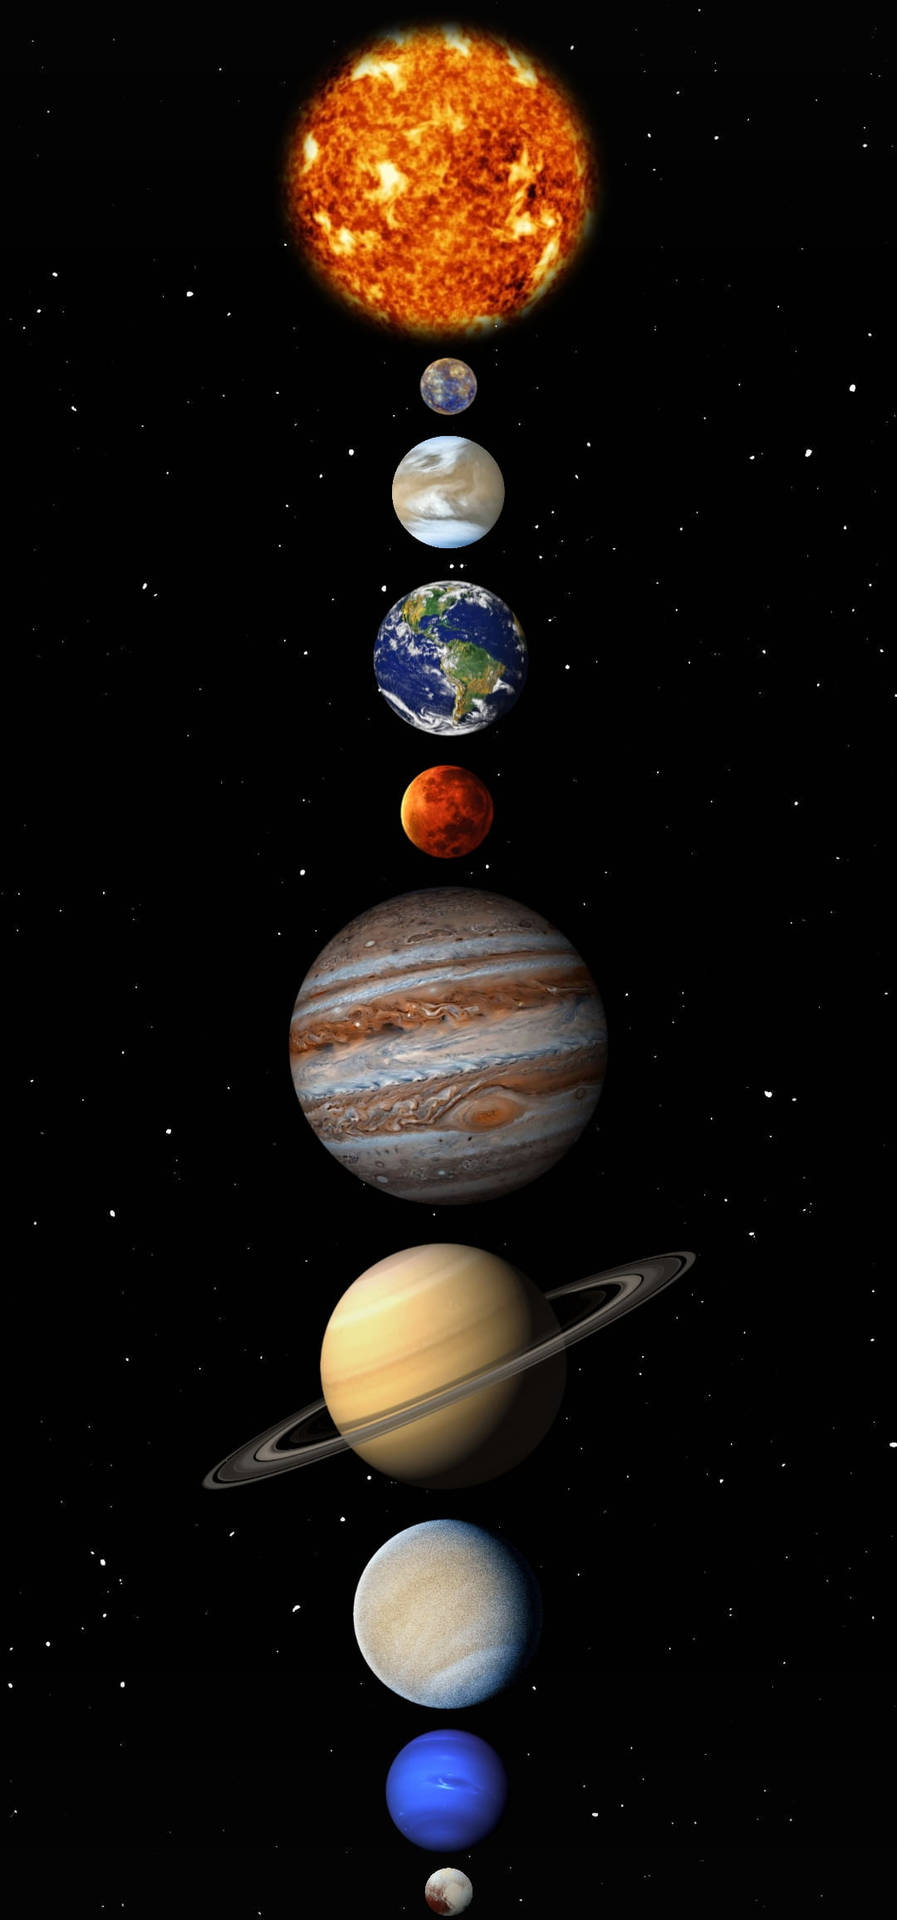 Caption: Stunning Hd View Of The Solar System Background